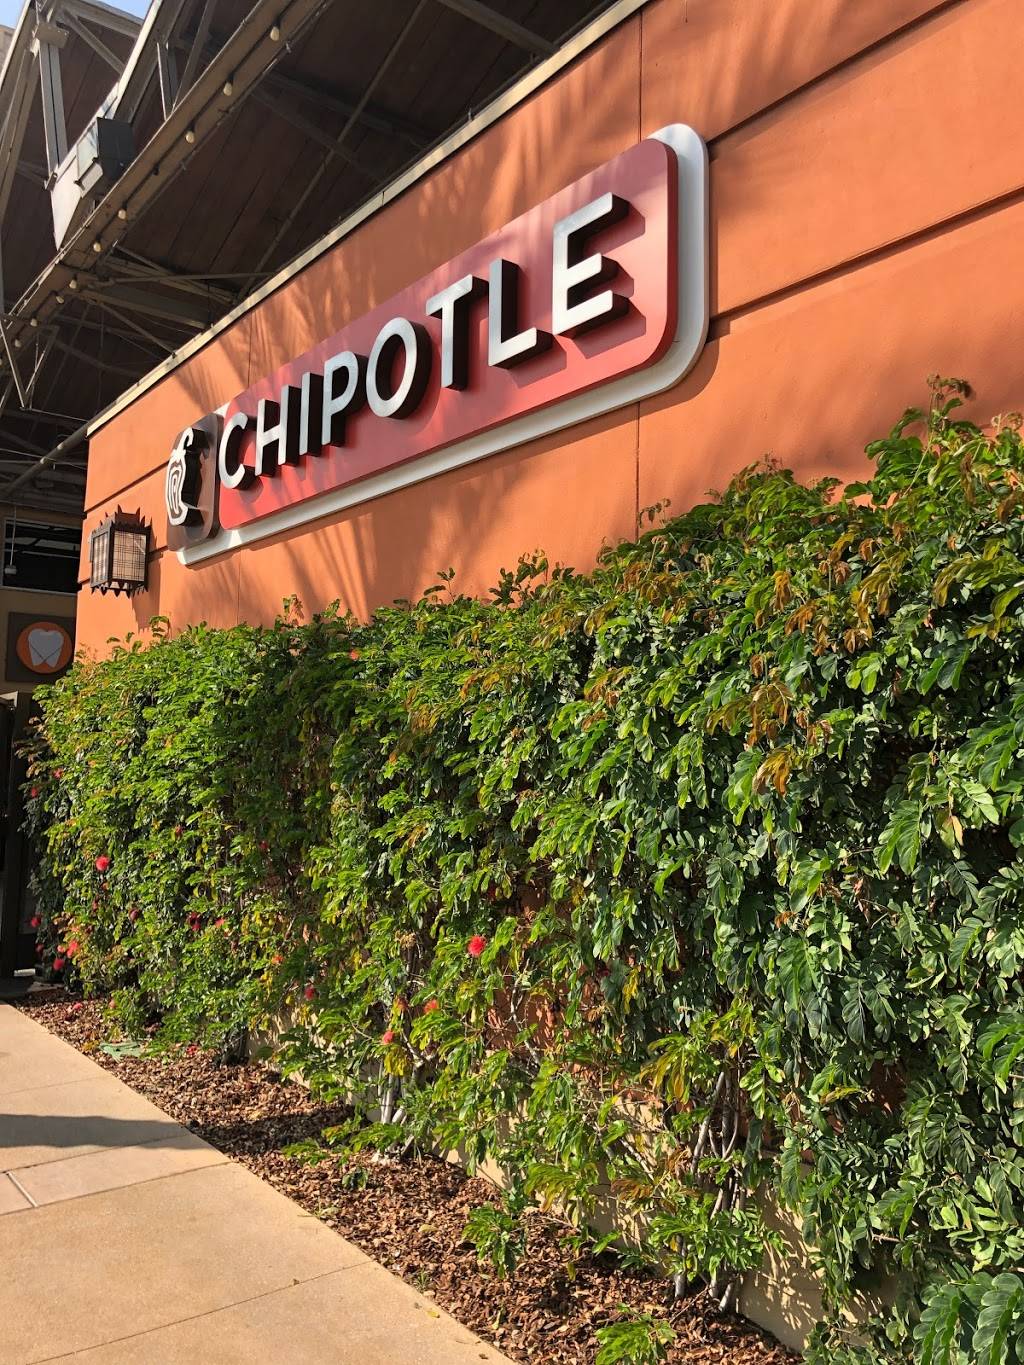 Chipotle Mexican Grill | restaurant | 100 Citadel Dr, Commerce, CA 90040, USA | 3237282268 OR +1 323-728-2268